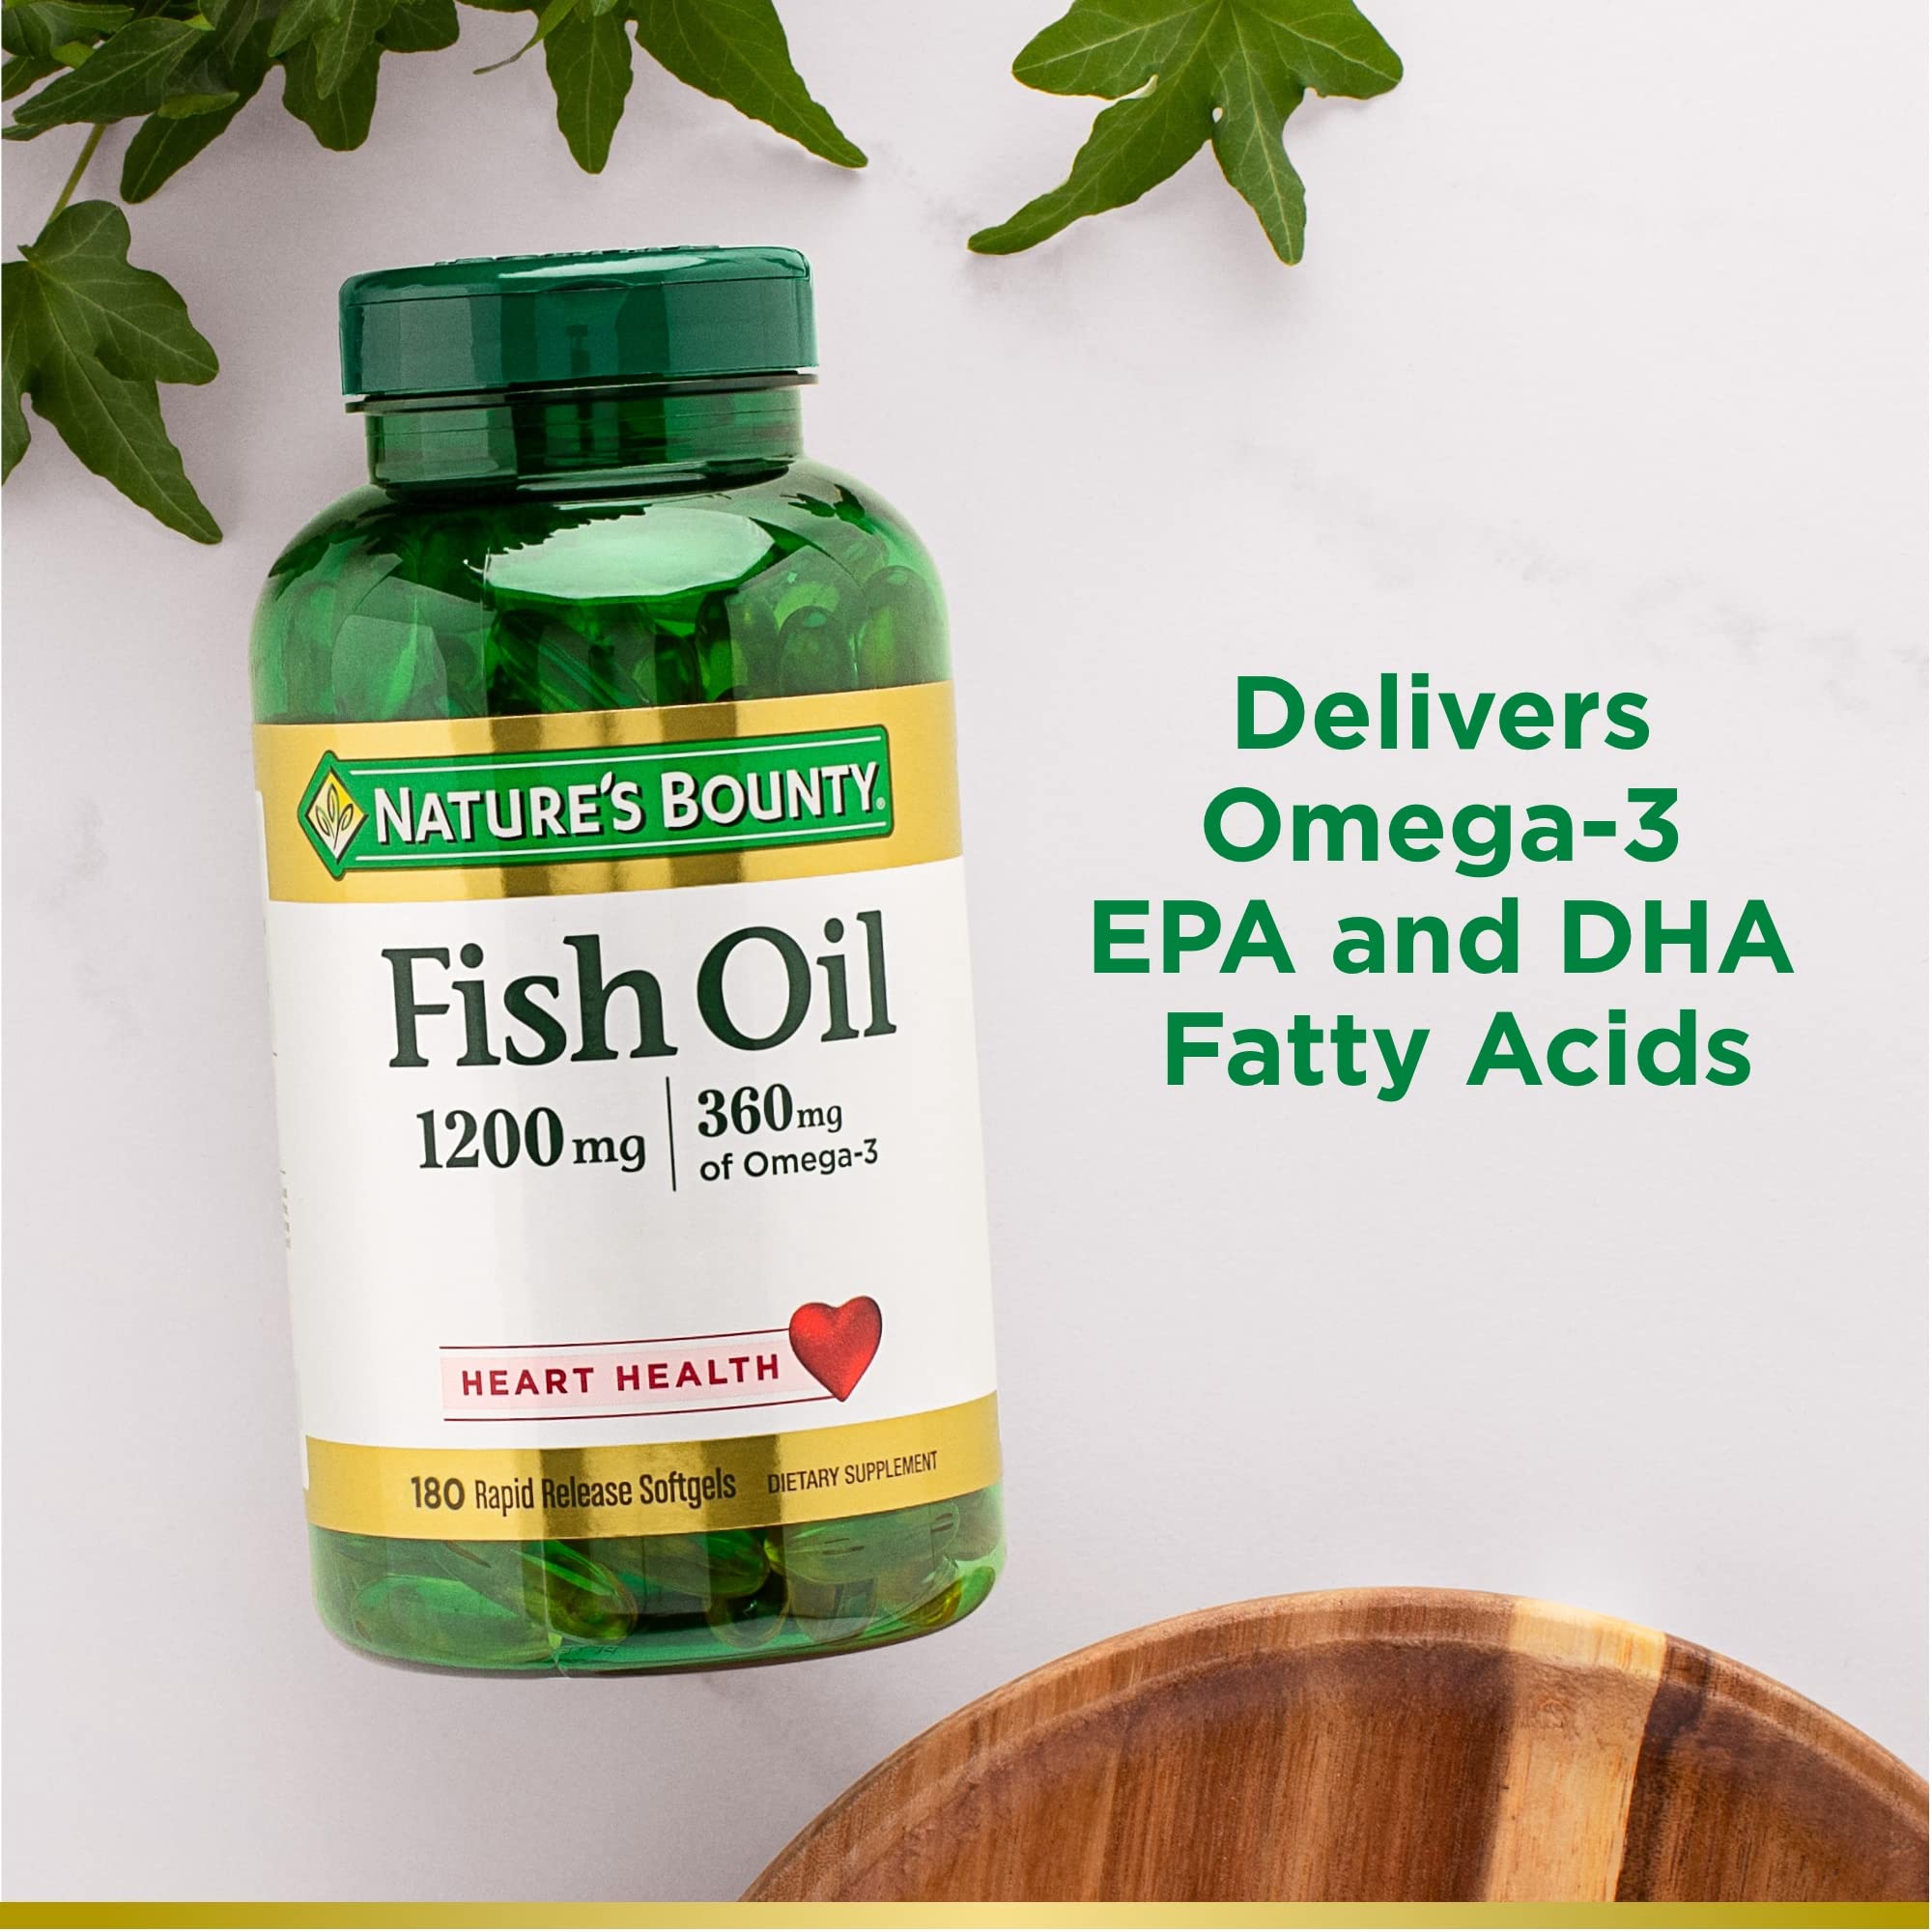 Nature's Bounty Fish Oil, Supports Heart Health, 1200 Mg, Rapid Release Softgels, 200 Ct